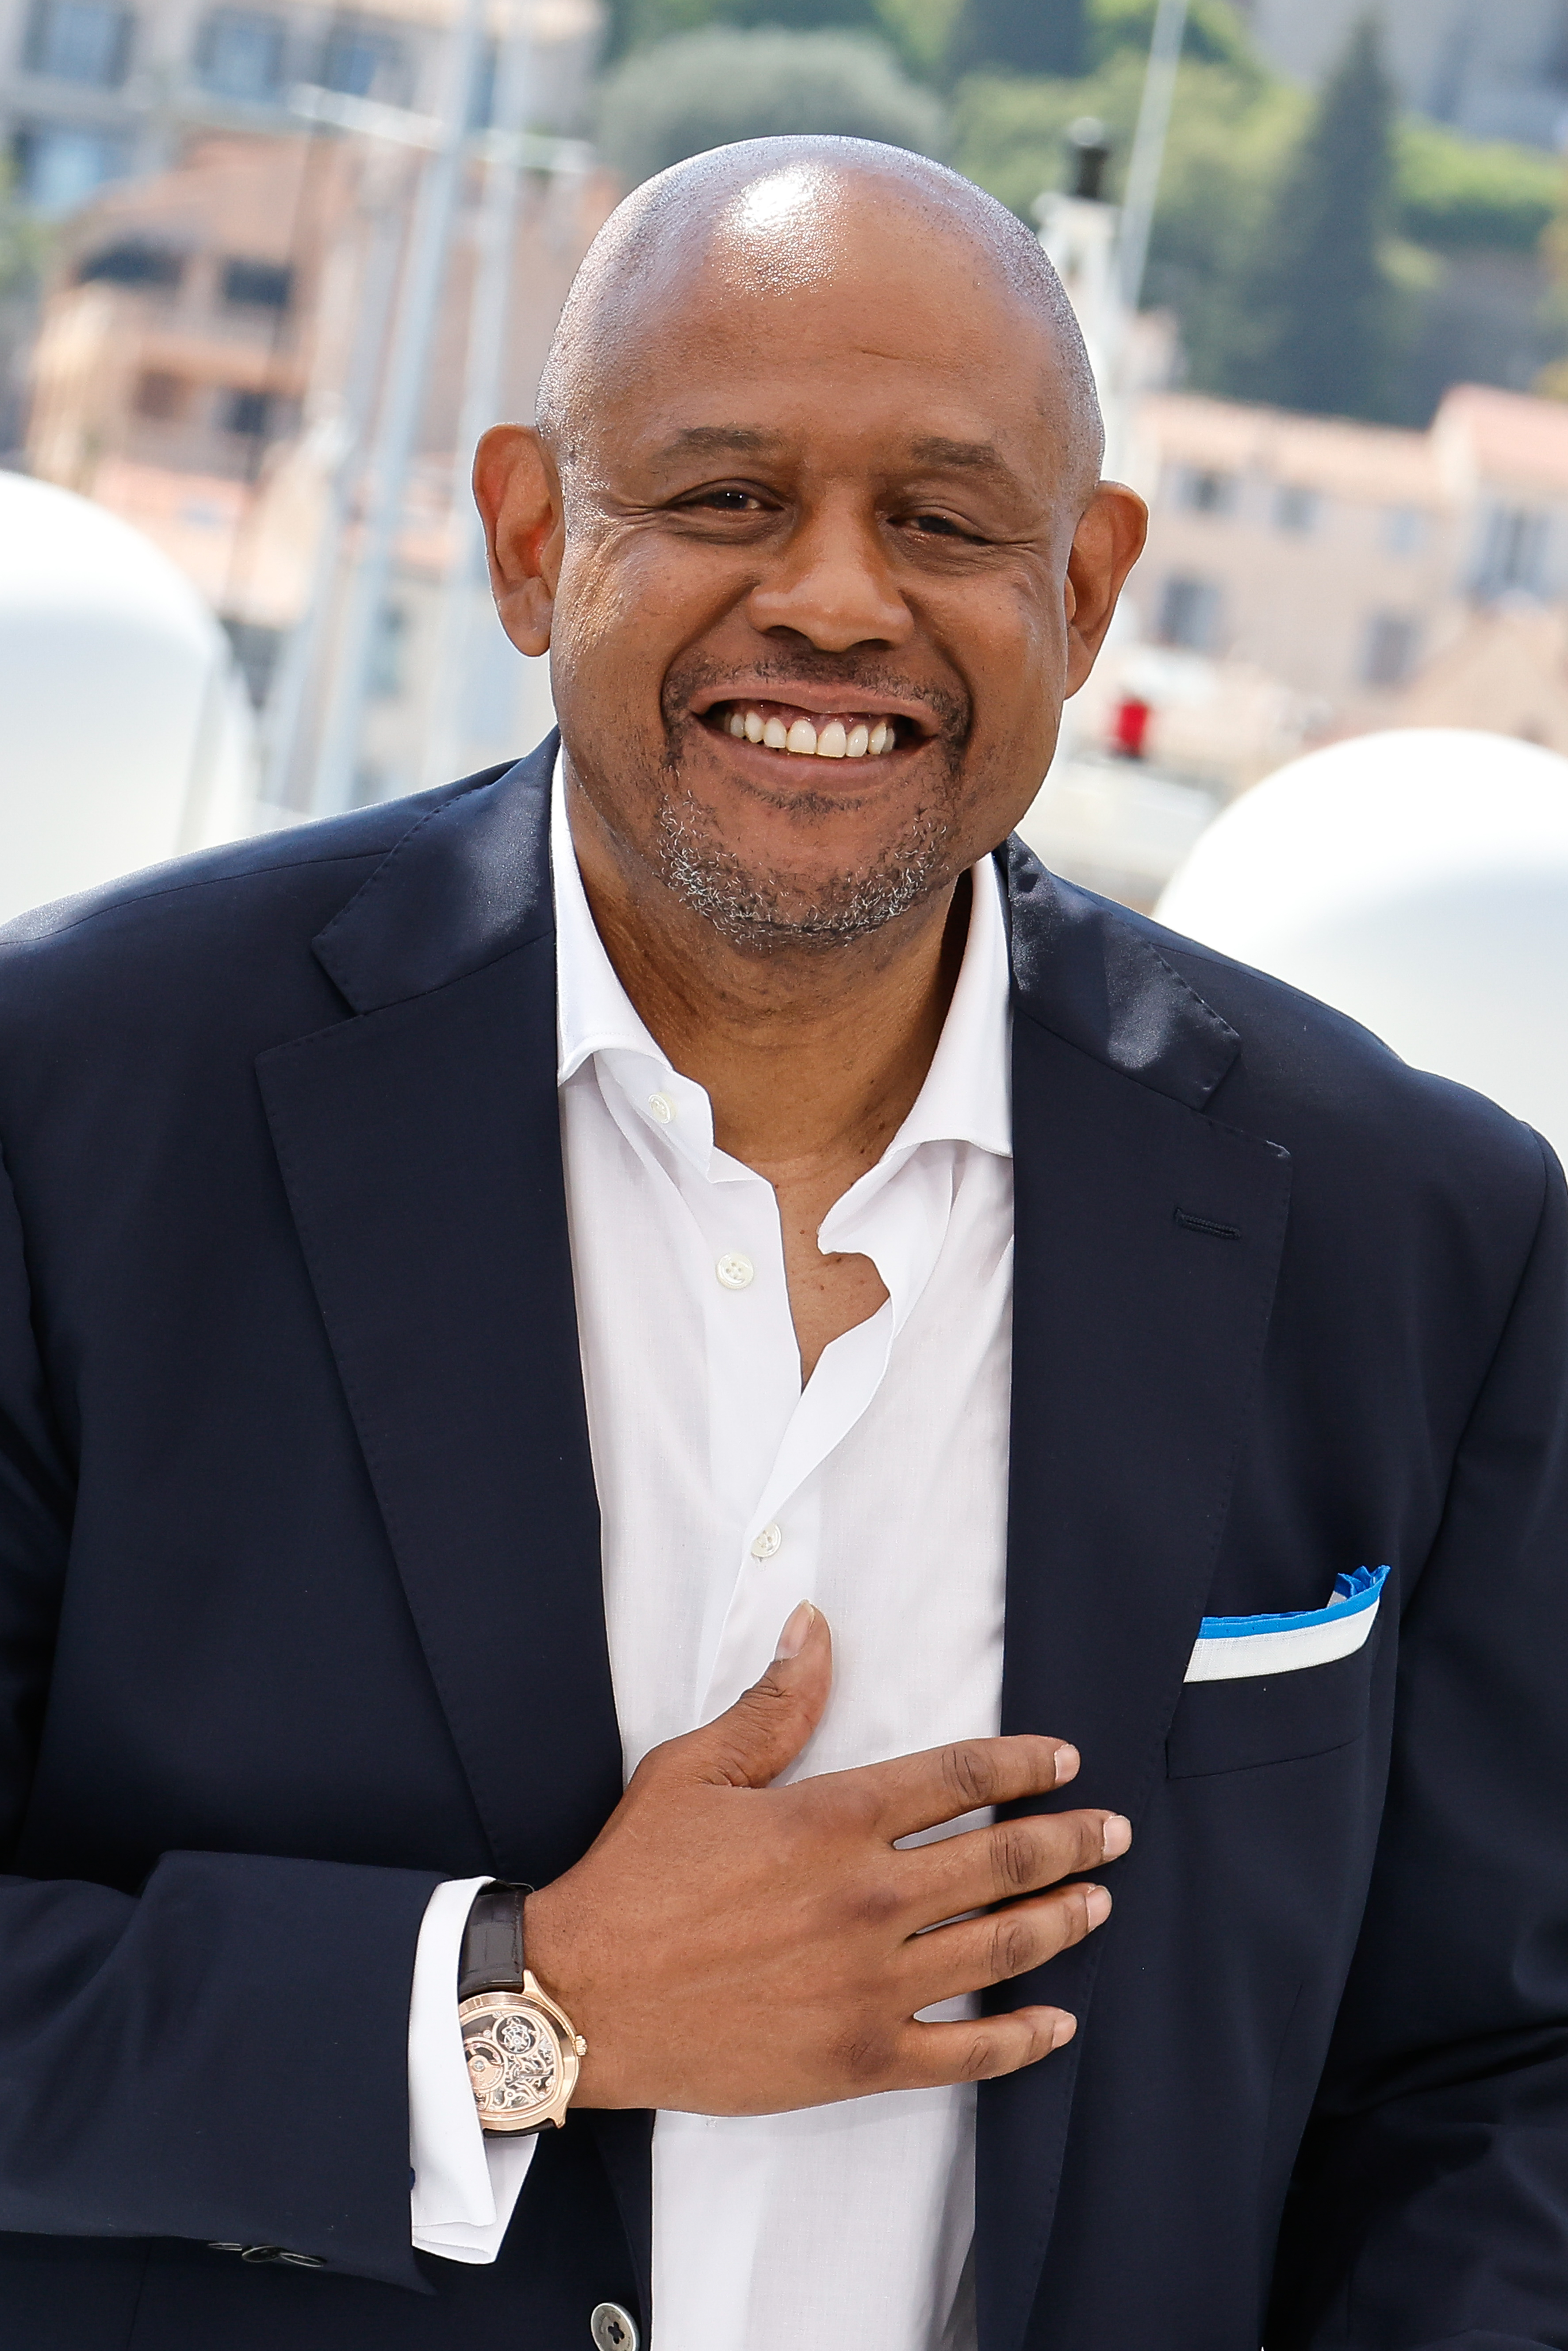 Forest Whitaker wearing a navy suit and white shirt, smiling at an event